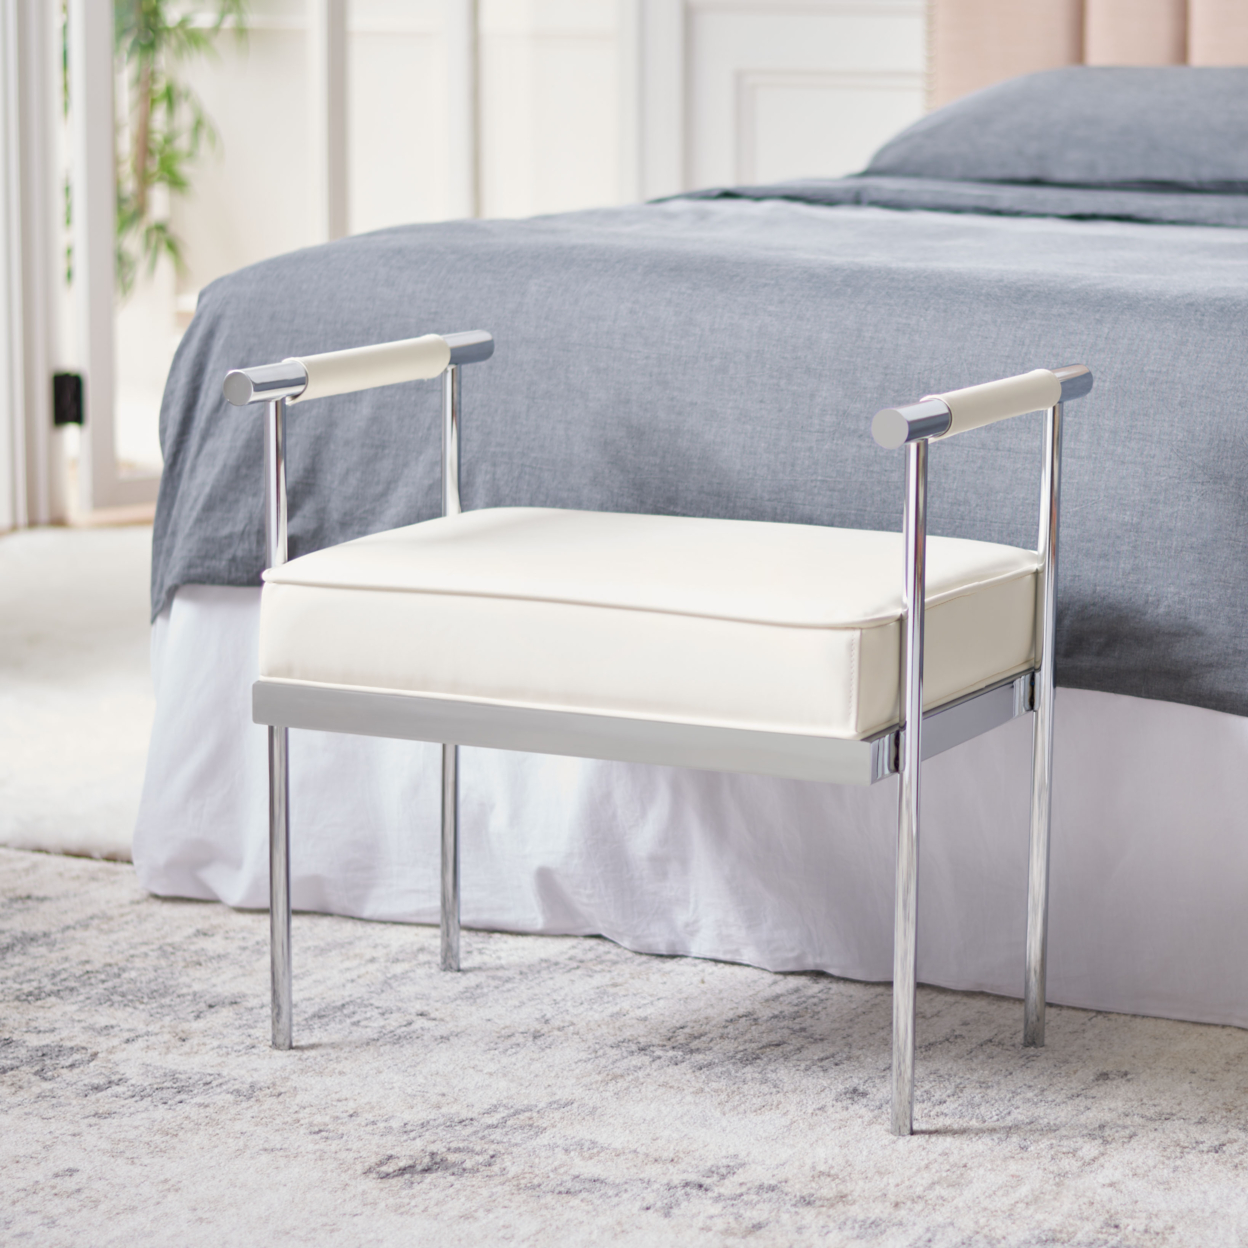 SAFAVIEH Pim Small Rectangle Bench With Arms White / Chrome